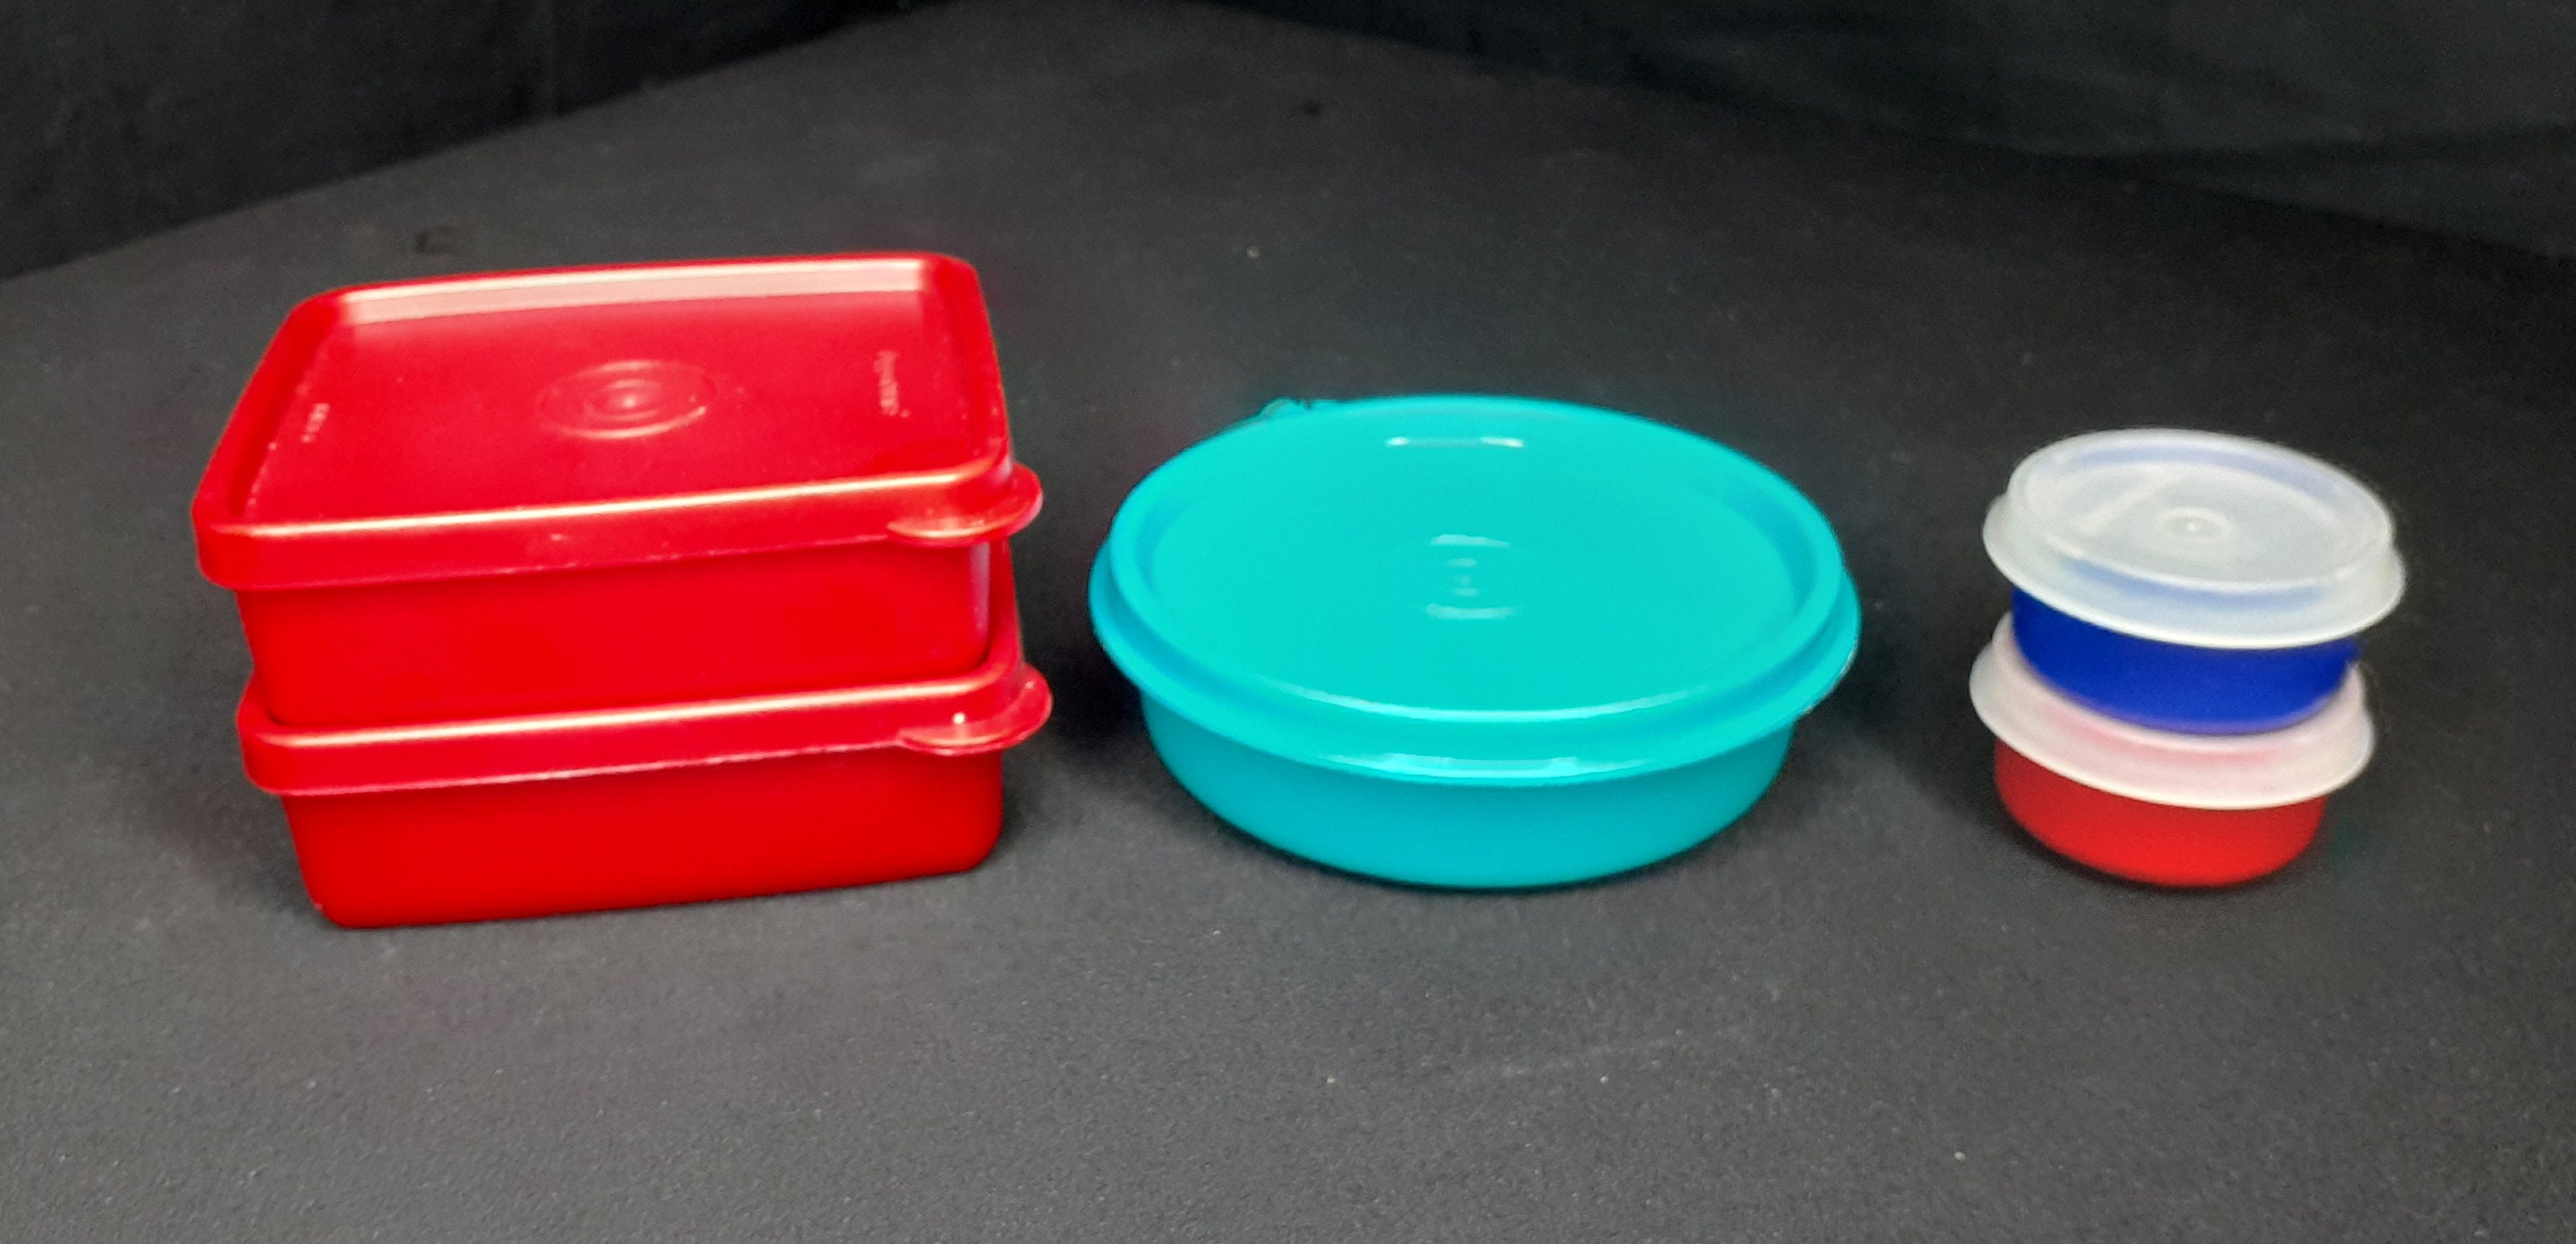 Vintage Variety of Small Tupperware Containers 1286 1516 